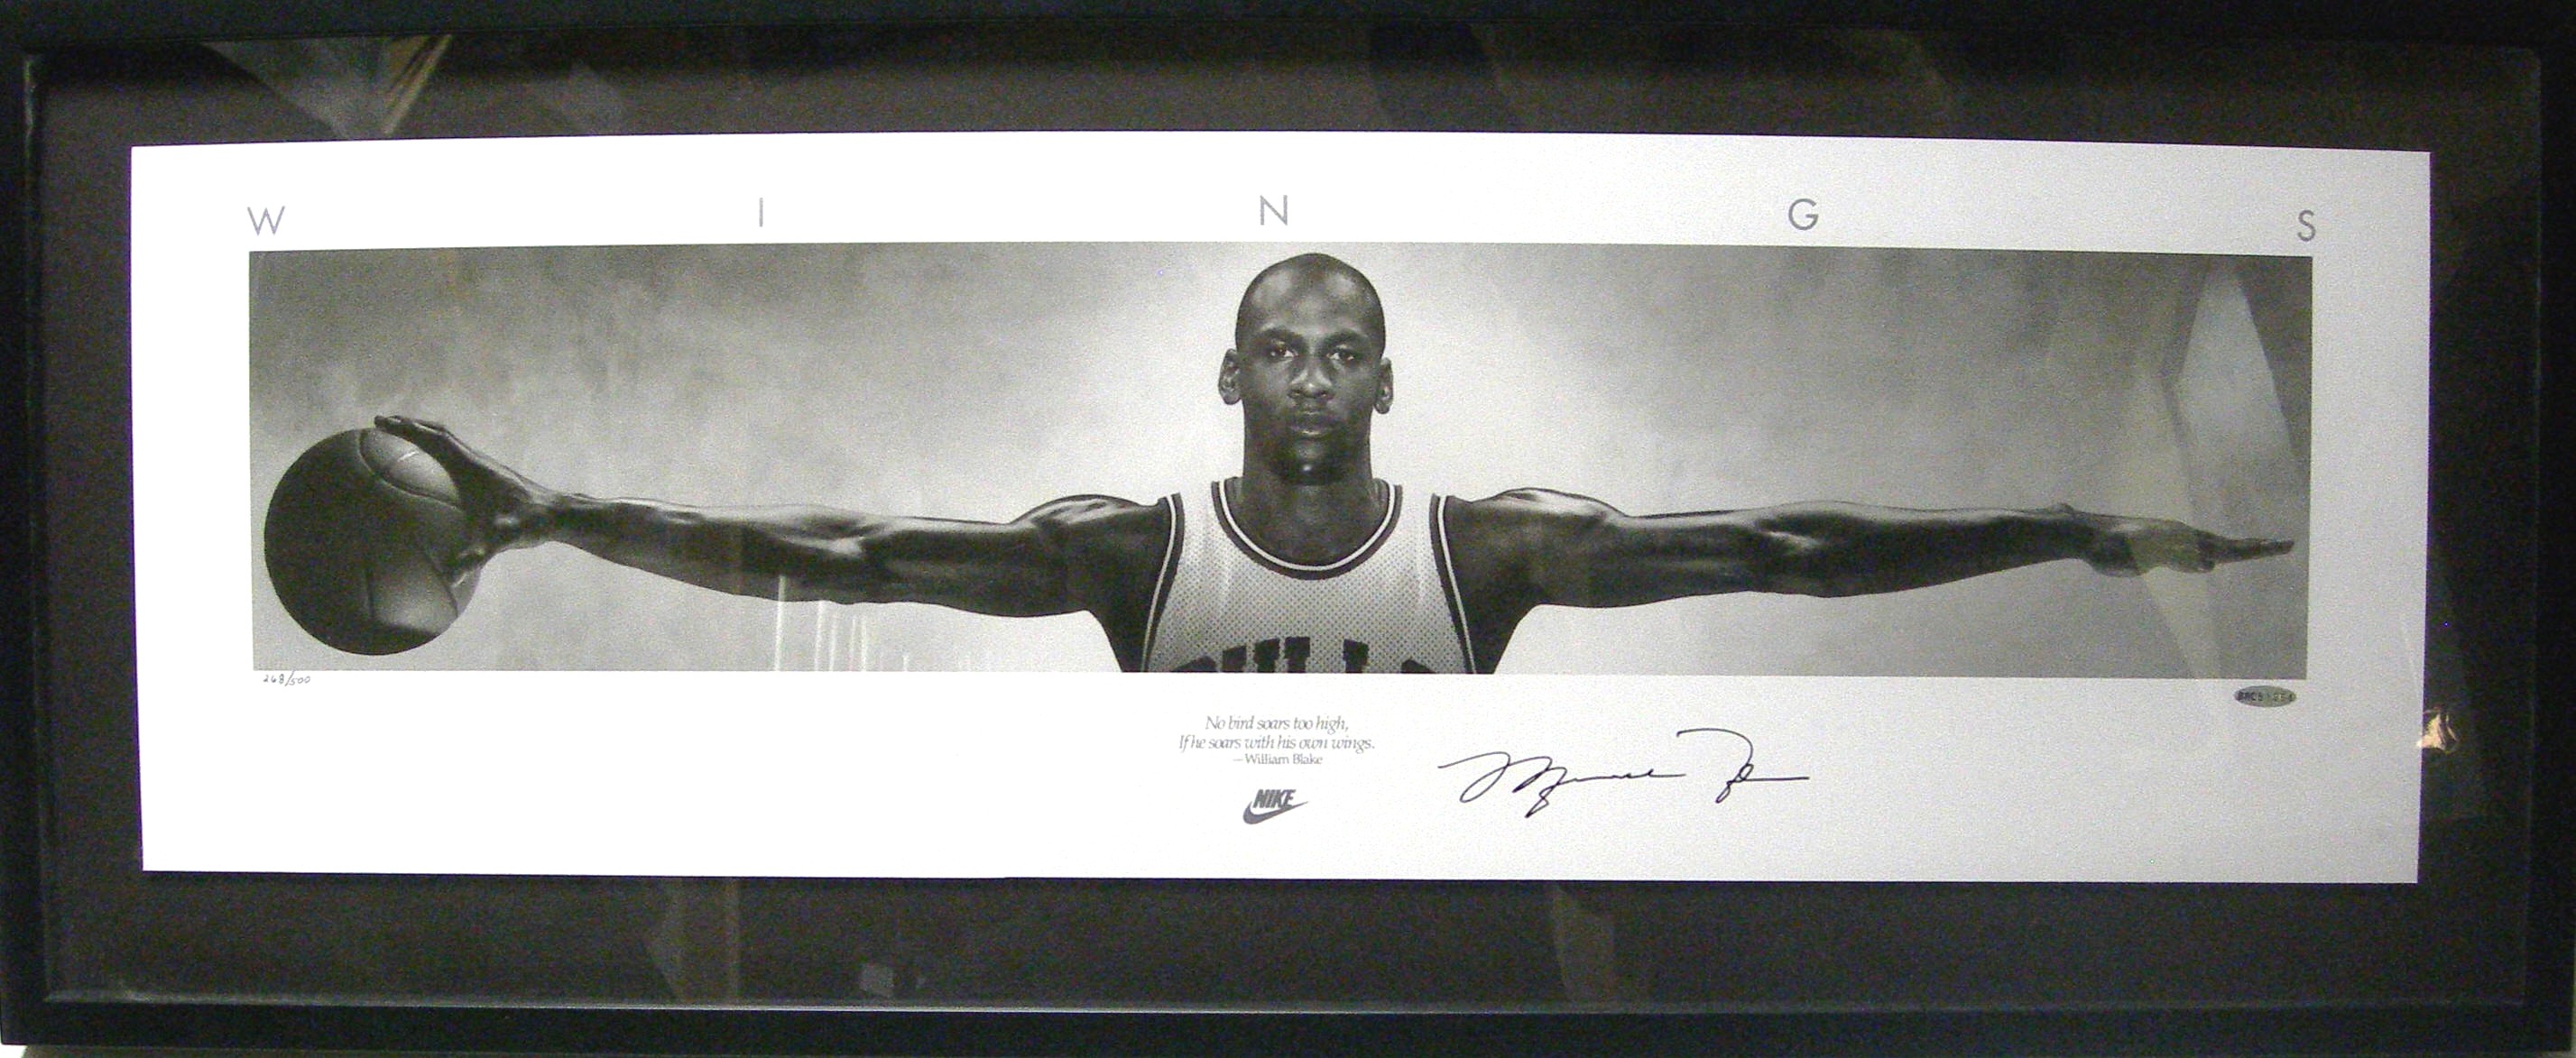 MICHAEL JORDAN 1963 SIGNED LIMITED EDITION WINGS POSTER